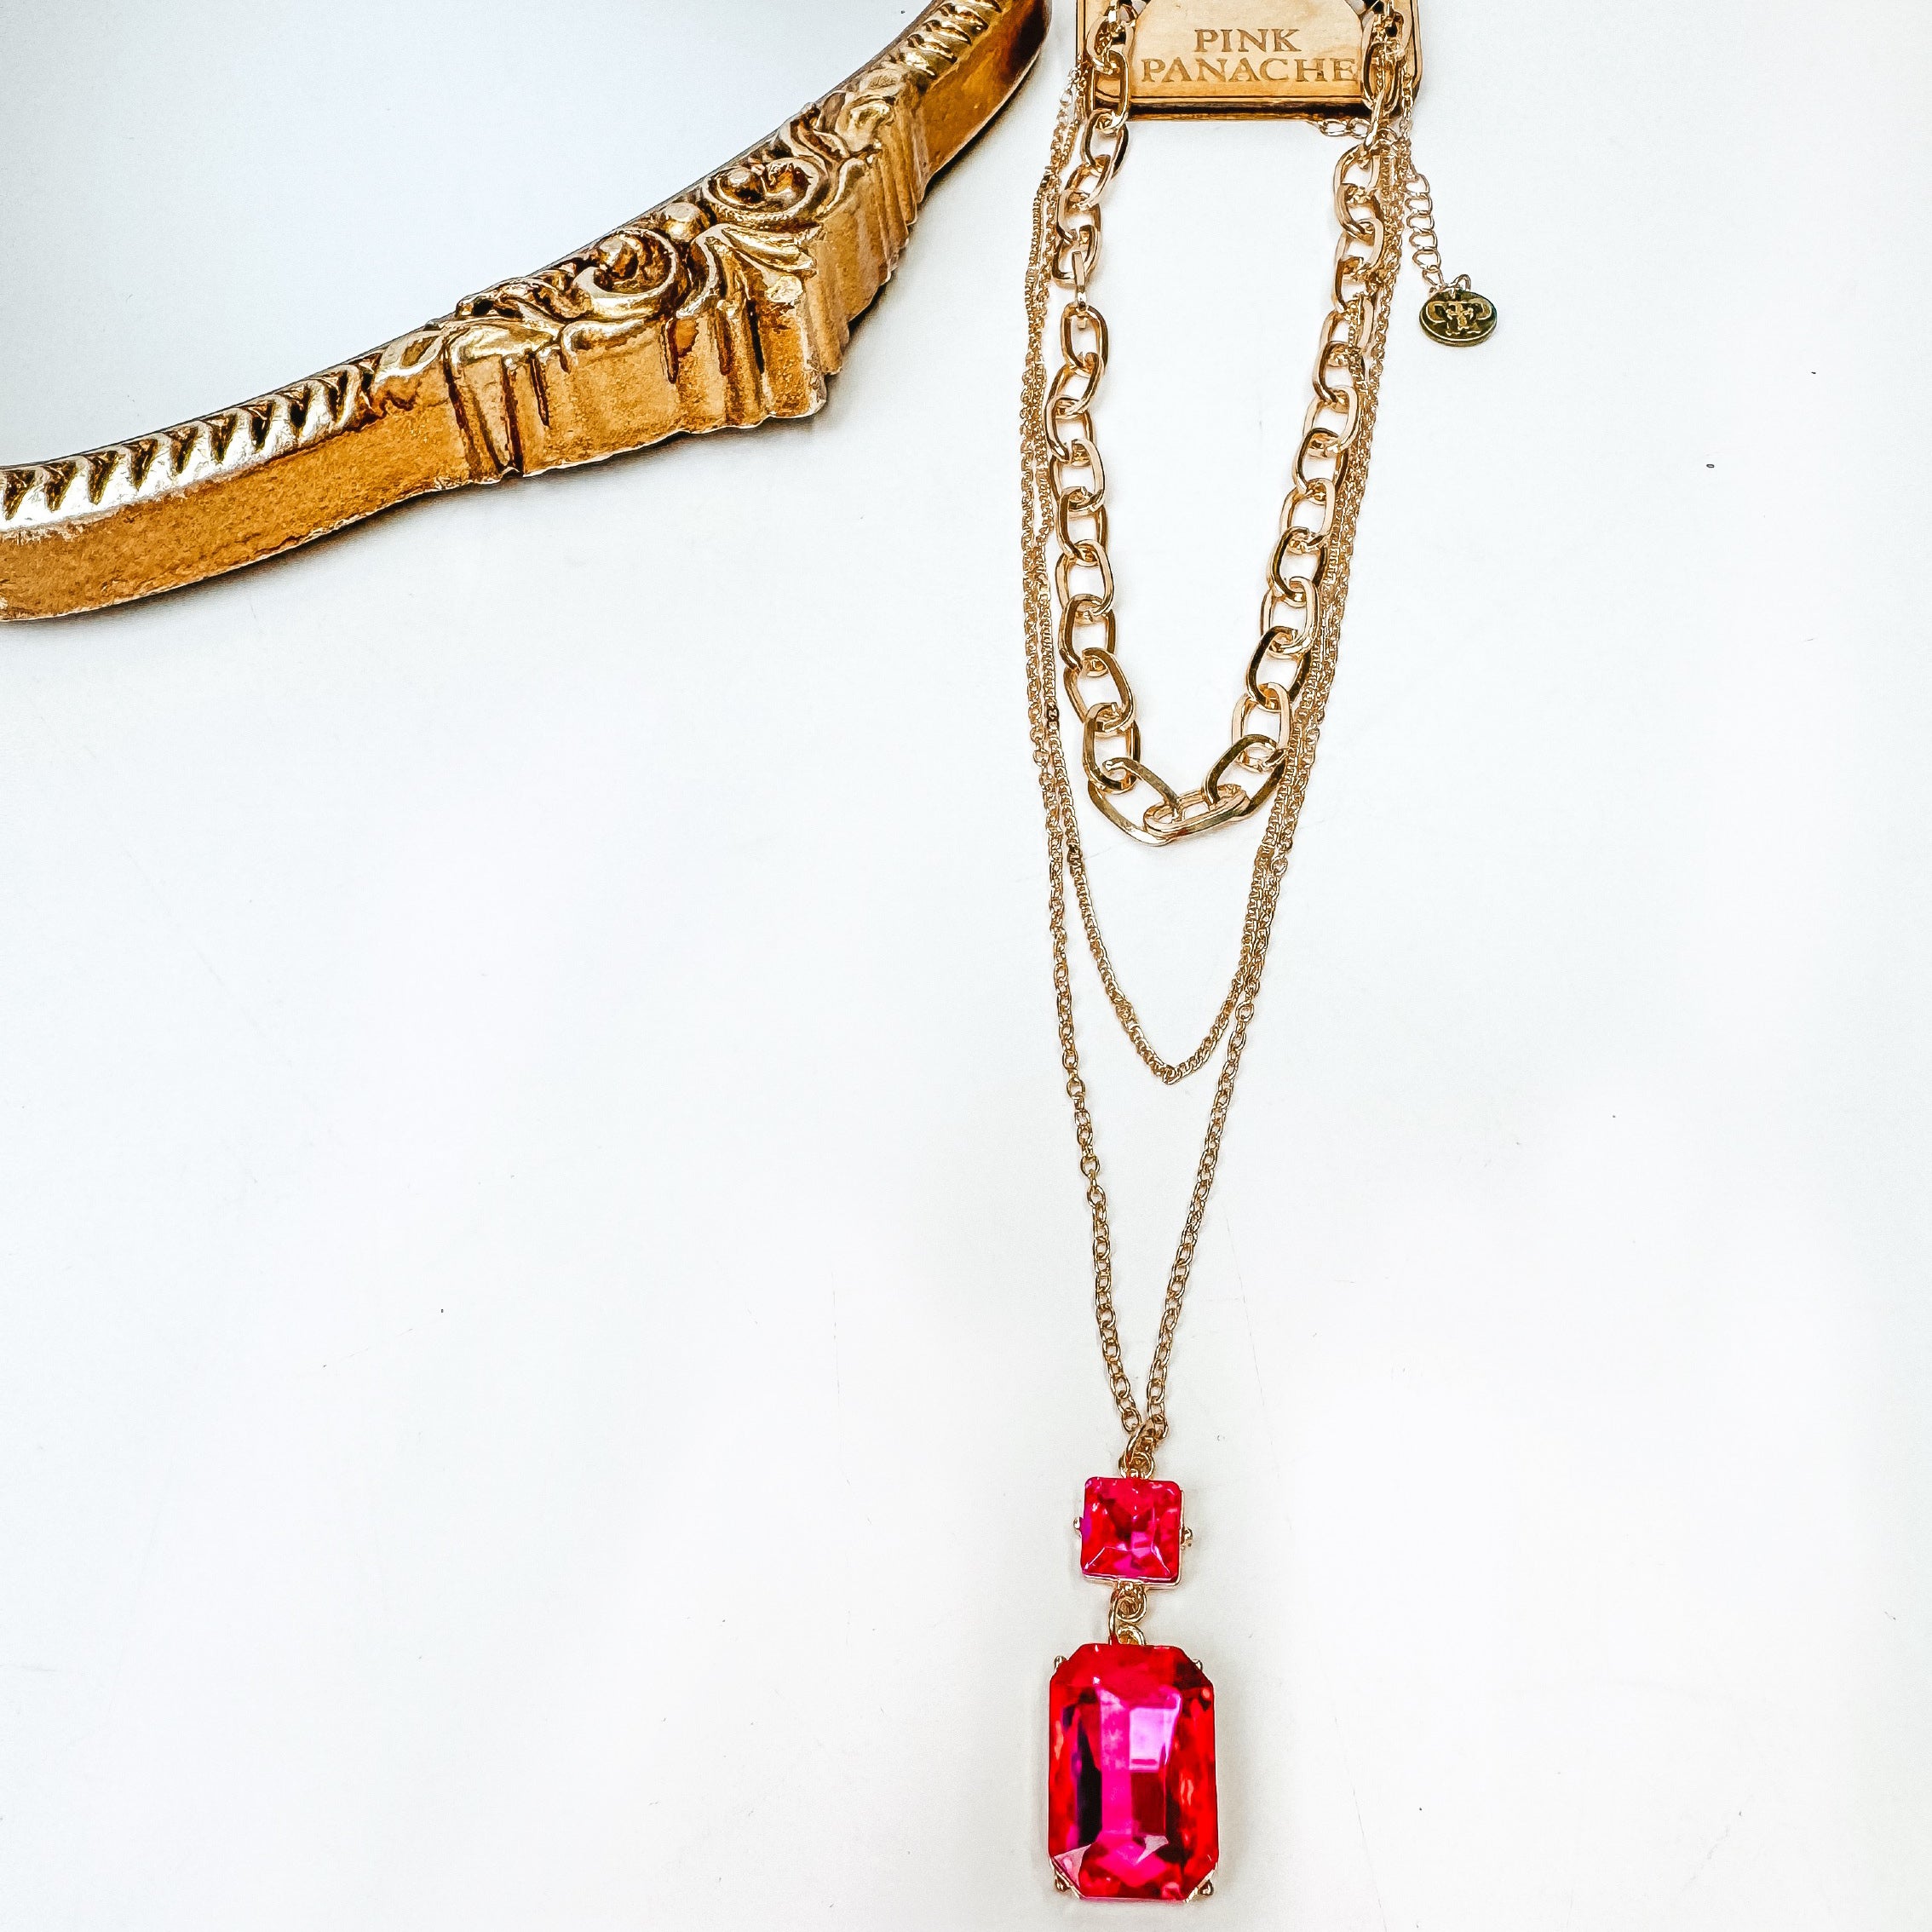 Pink Panache | 3 Strand Gold Tone Chain Necklace with Fuchsia Pink Square and Rectangle Pendant - Giddy Up Glamour Boutique